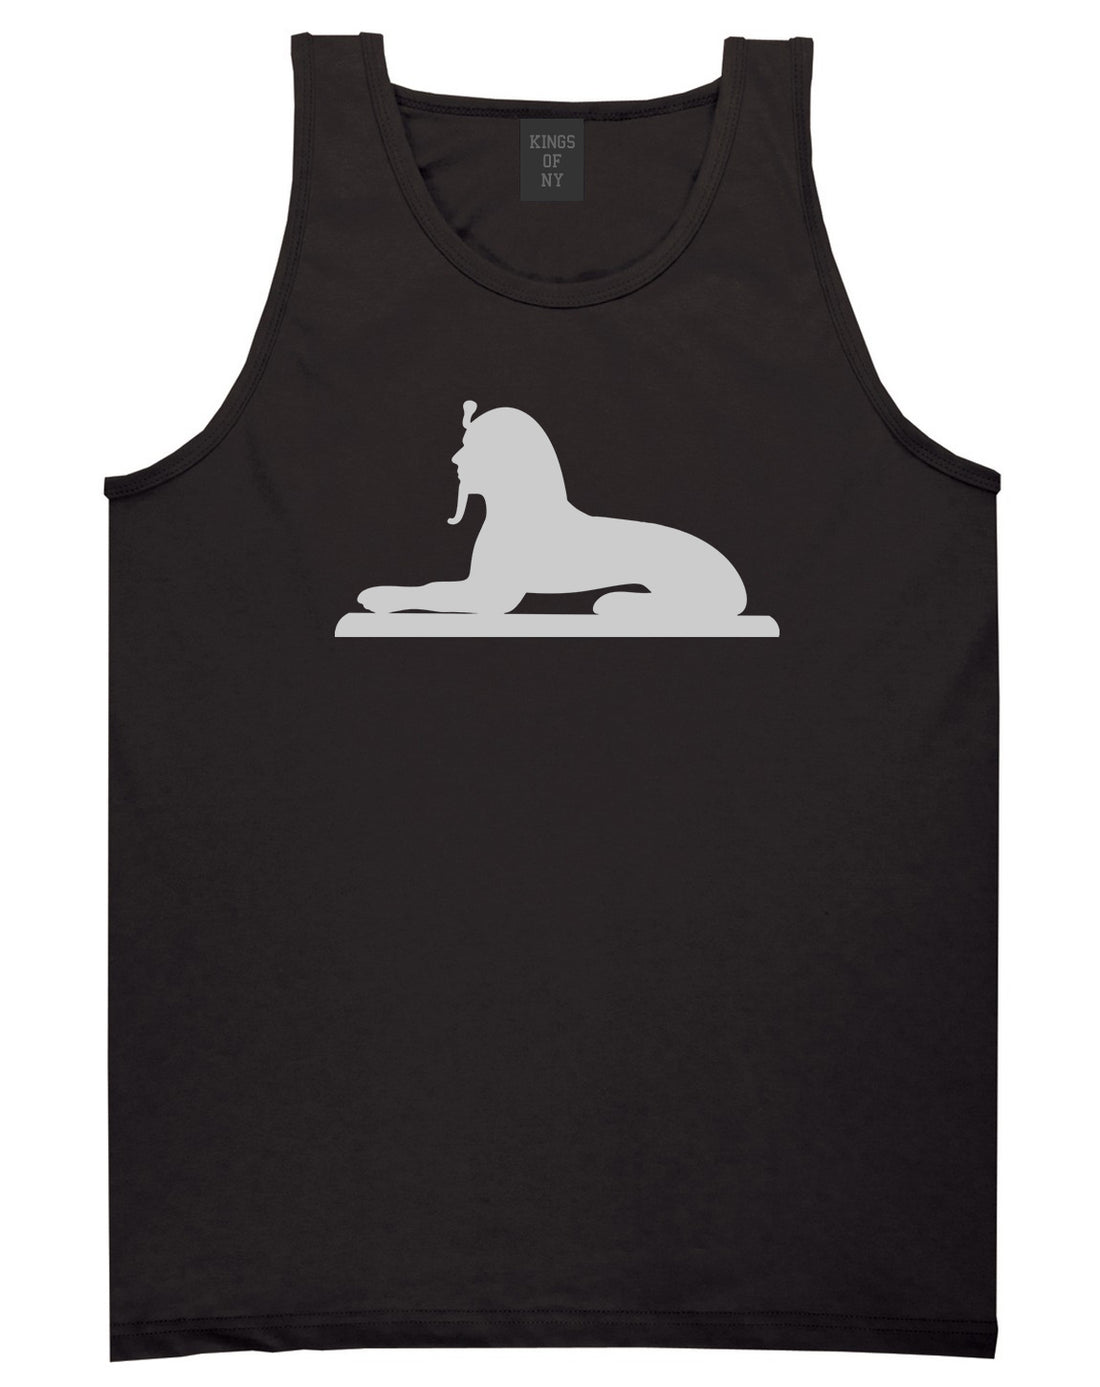 Egyptian Sphinx Mens Tank Top Shirt Black by Kings Of NY